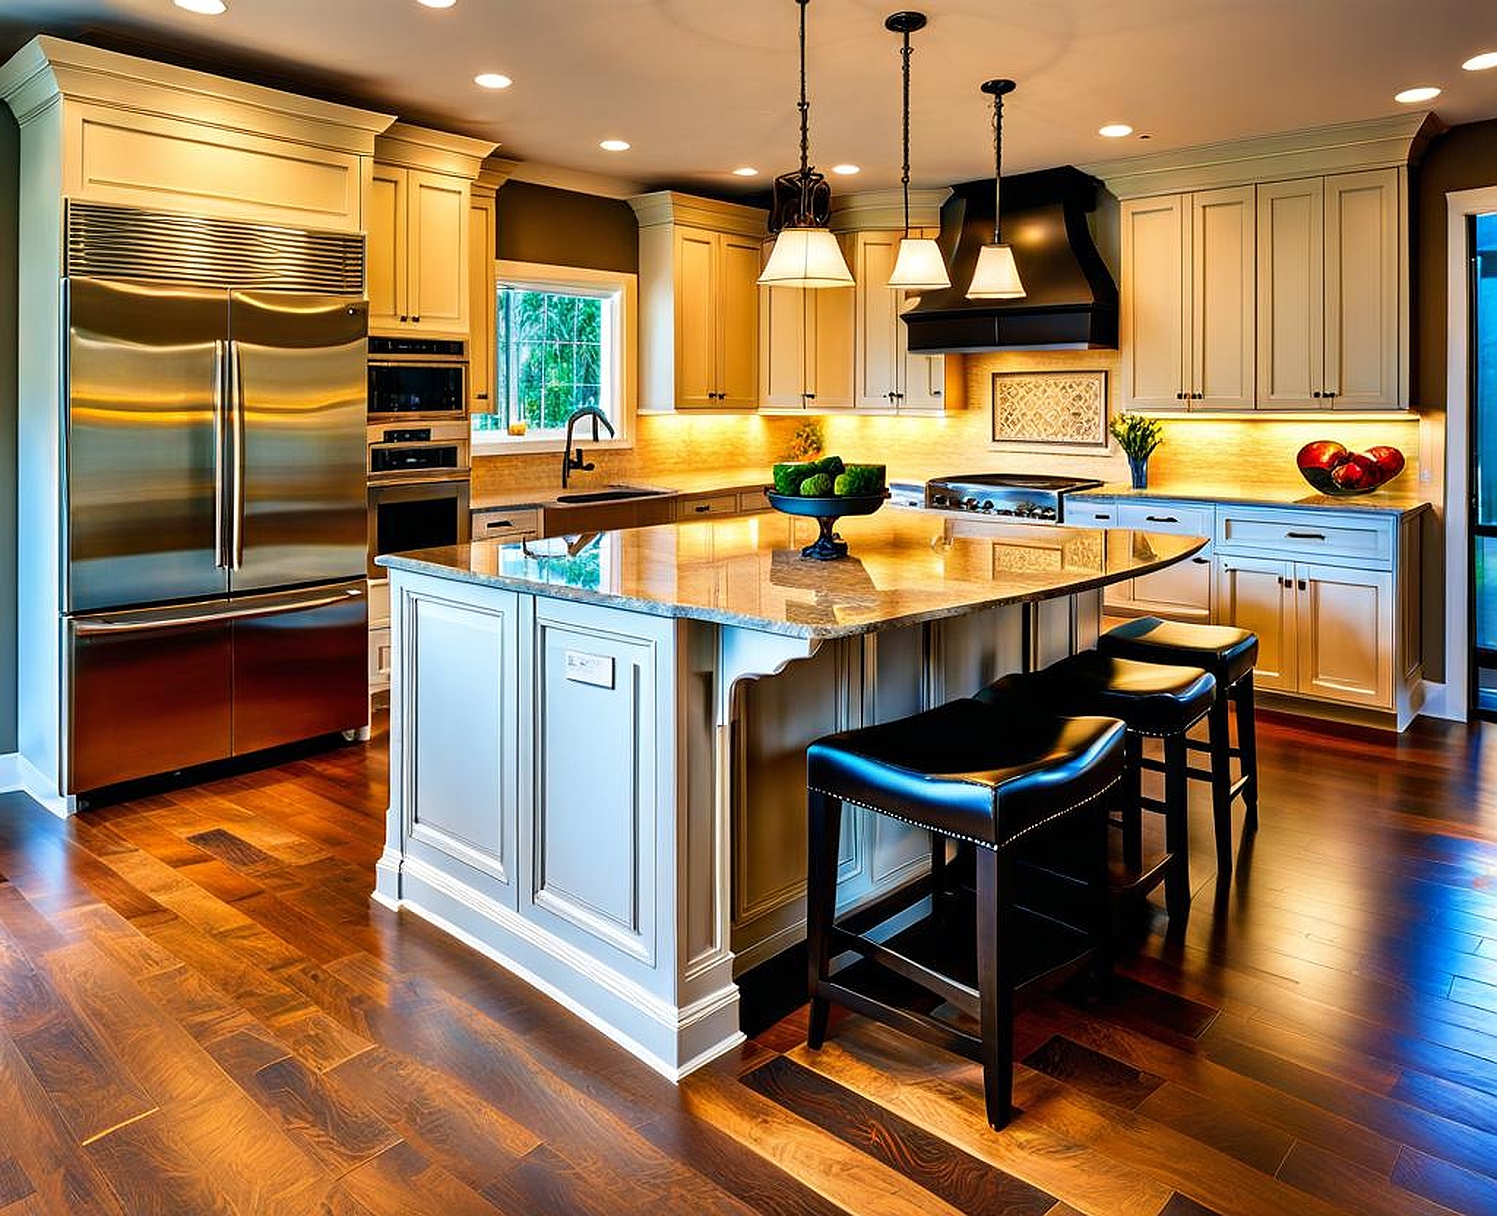 Kitchen Island Dimensions and Standard Size Guidelines Revealed